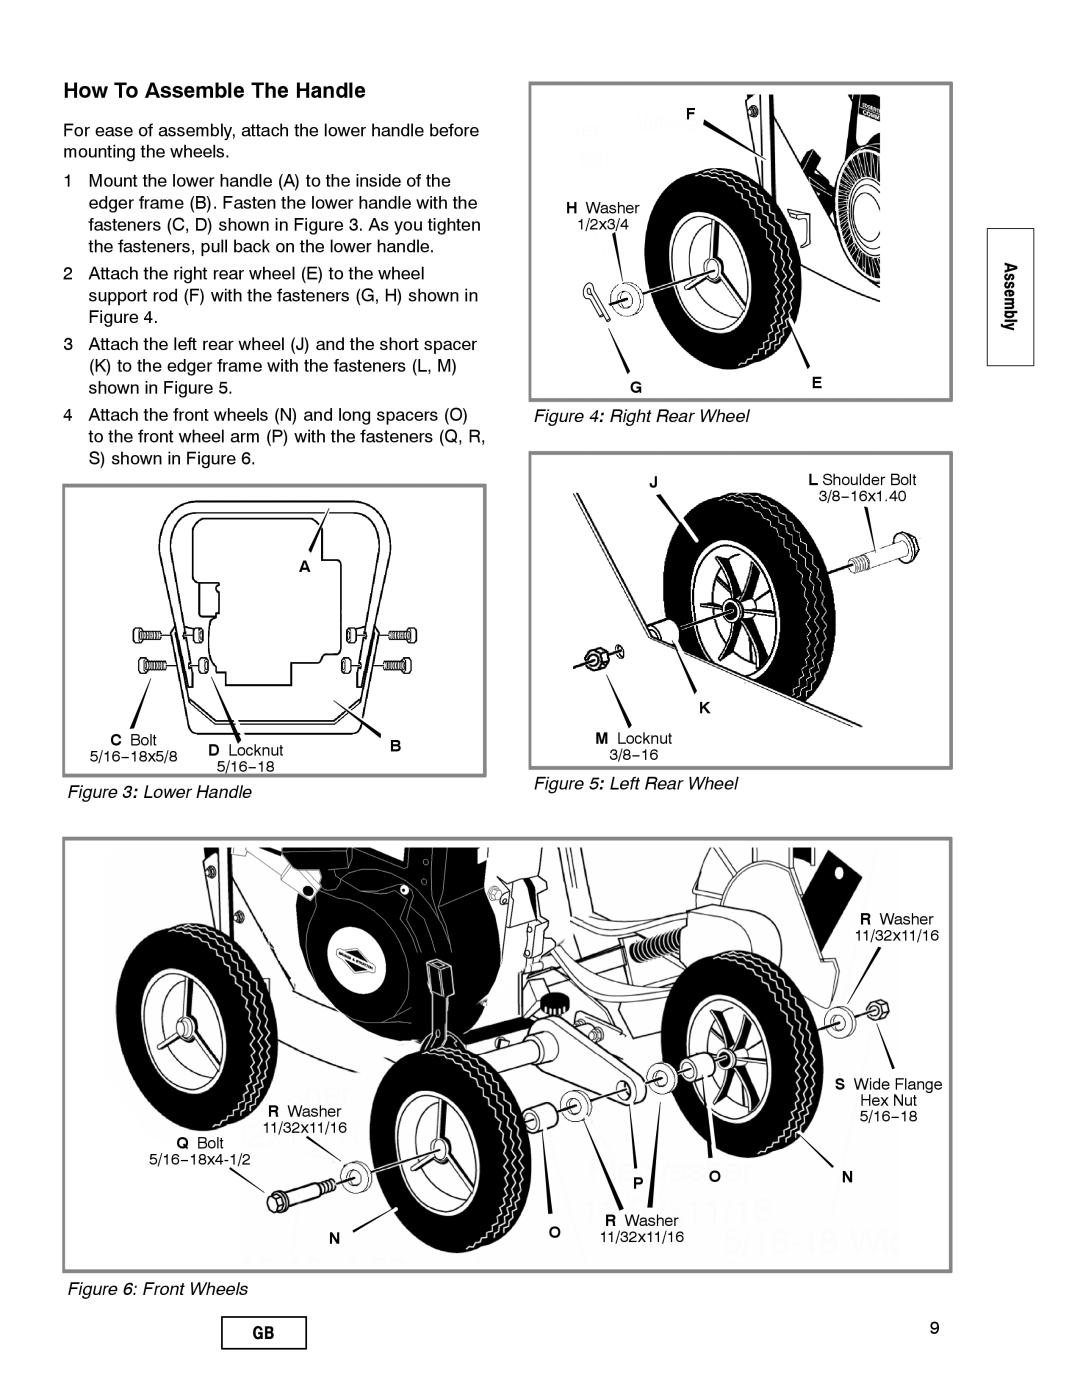 Husqvarna LE389 manual How To Assemble The Handle, Lower Handle, Right Rear Wheel, Left Rear Wheel, Front Wheels 